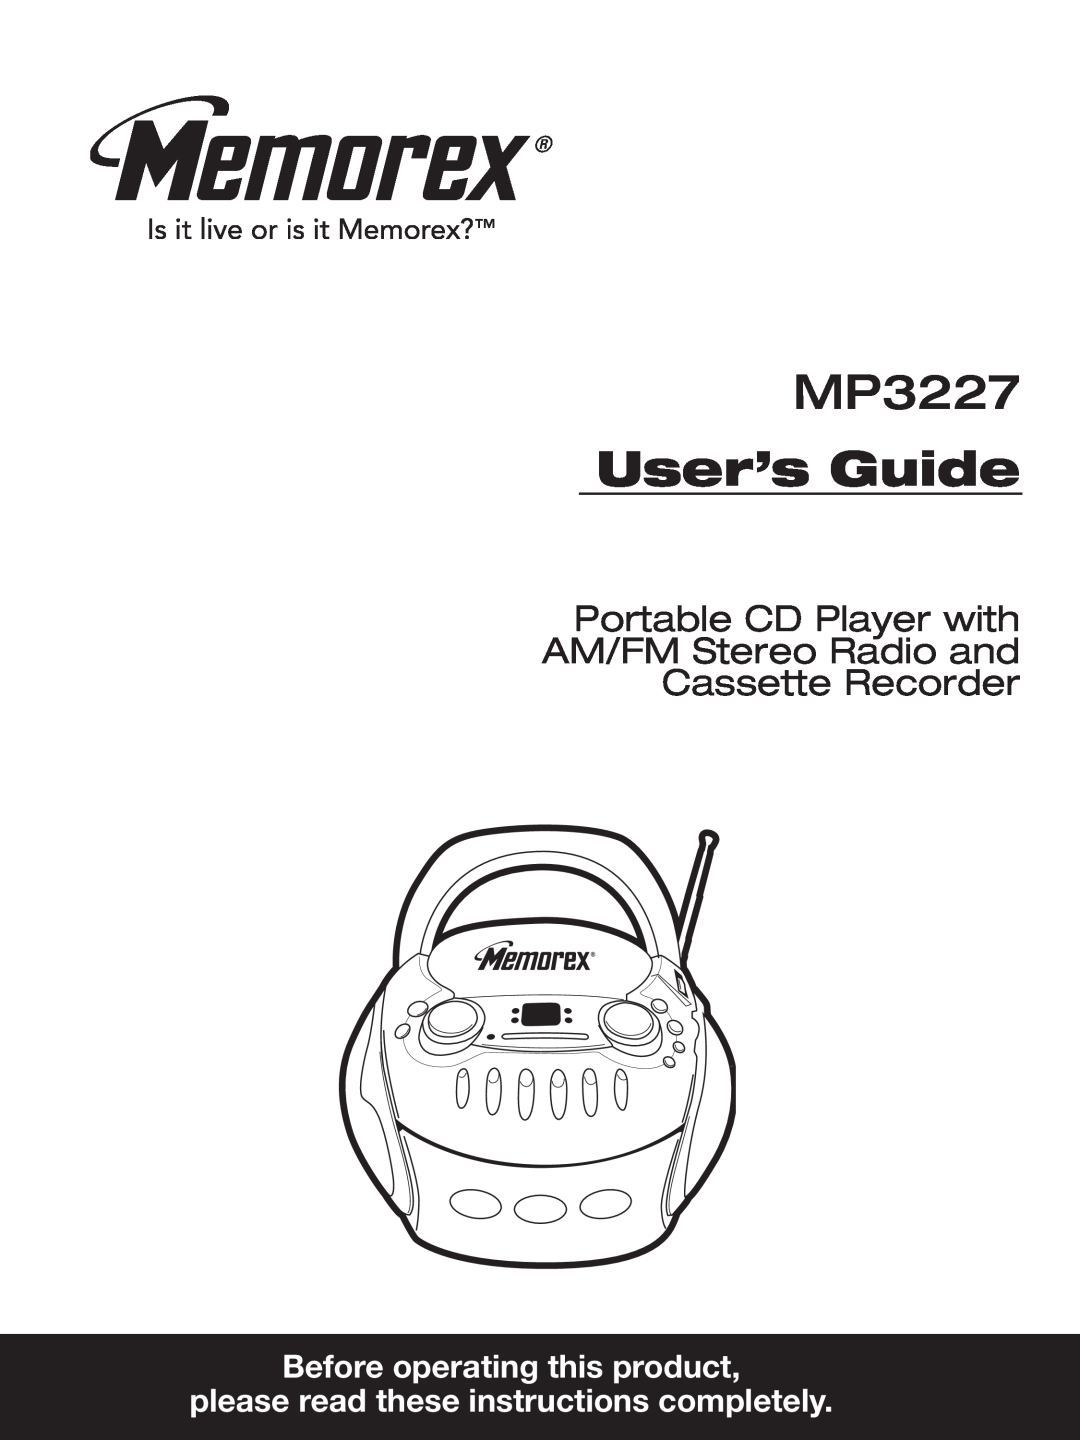 Memorex MP3227 manual User’s Guide, Before operating this product, please read these instructions completely 